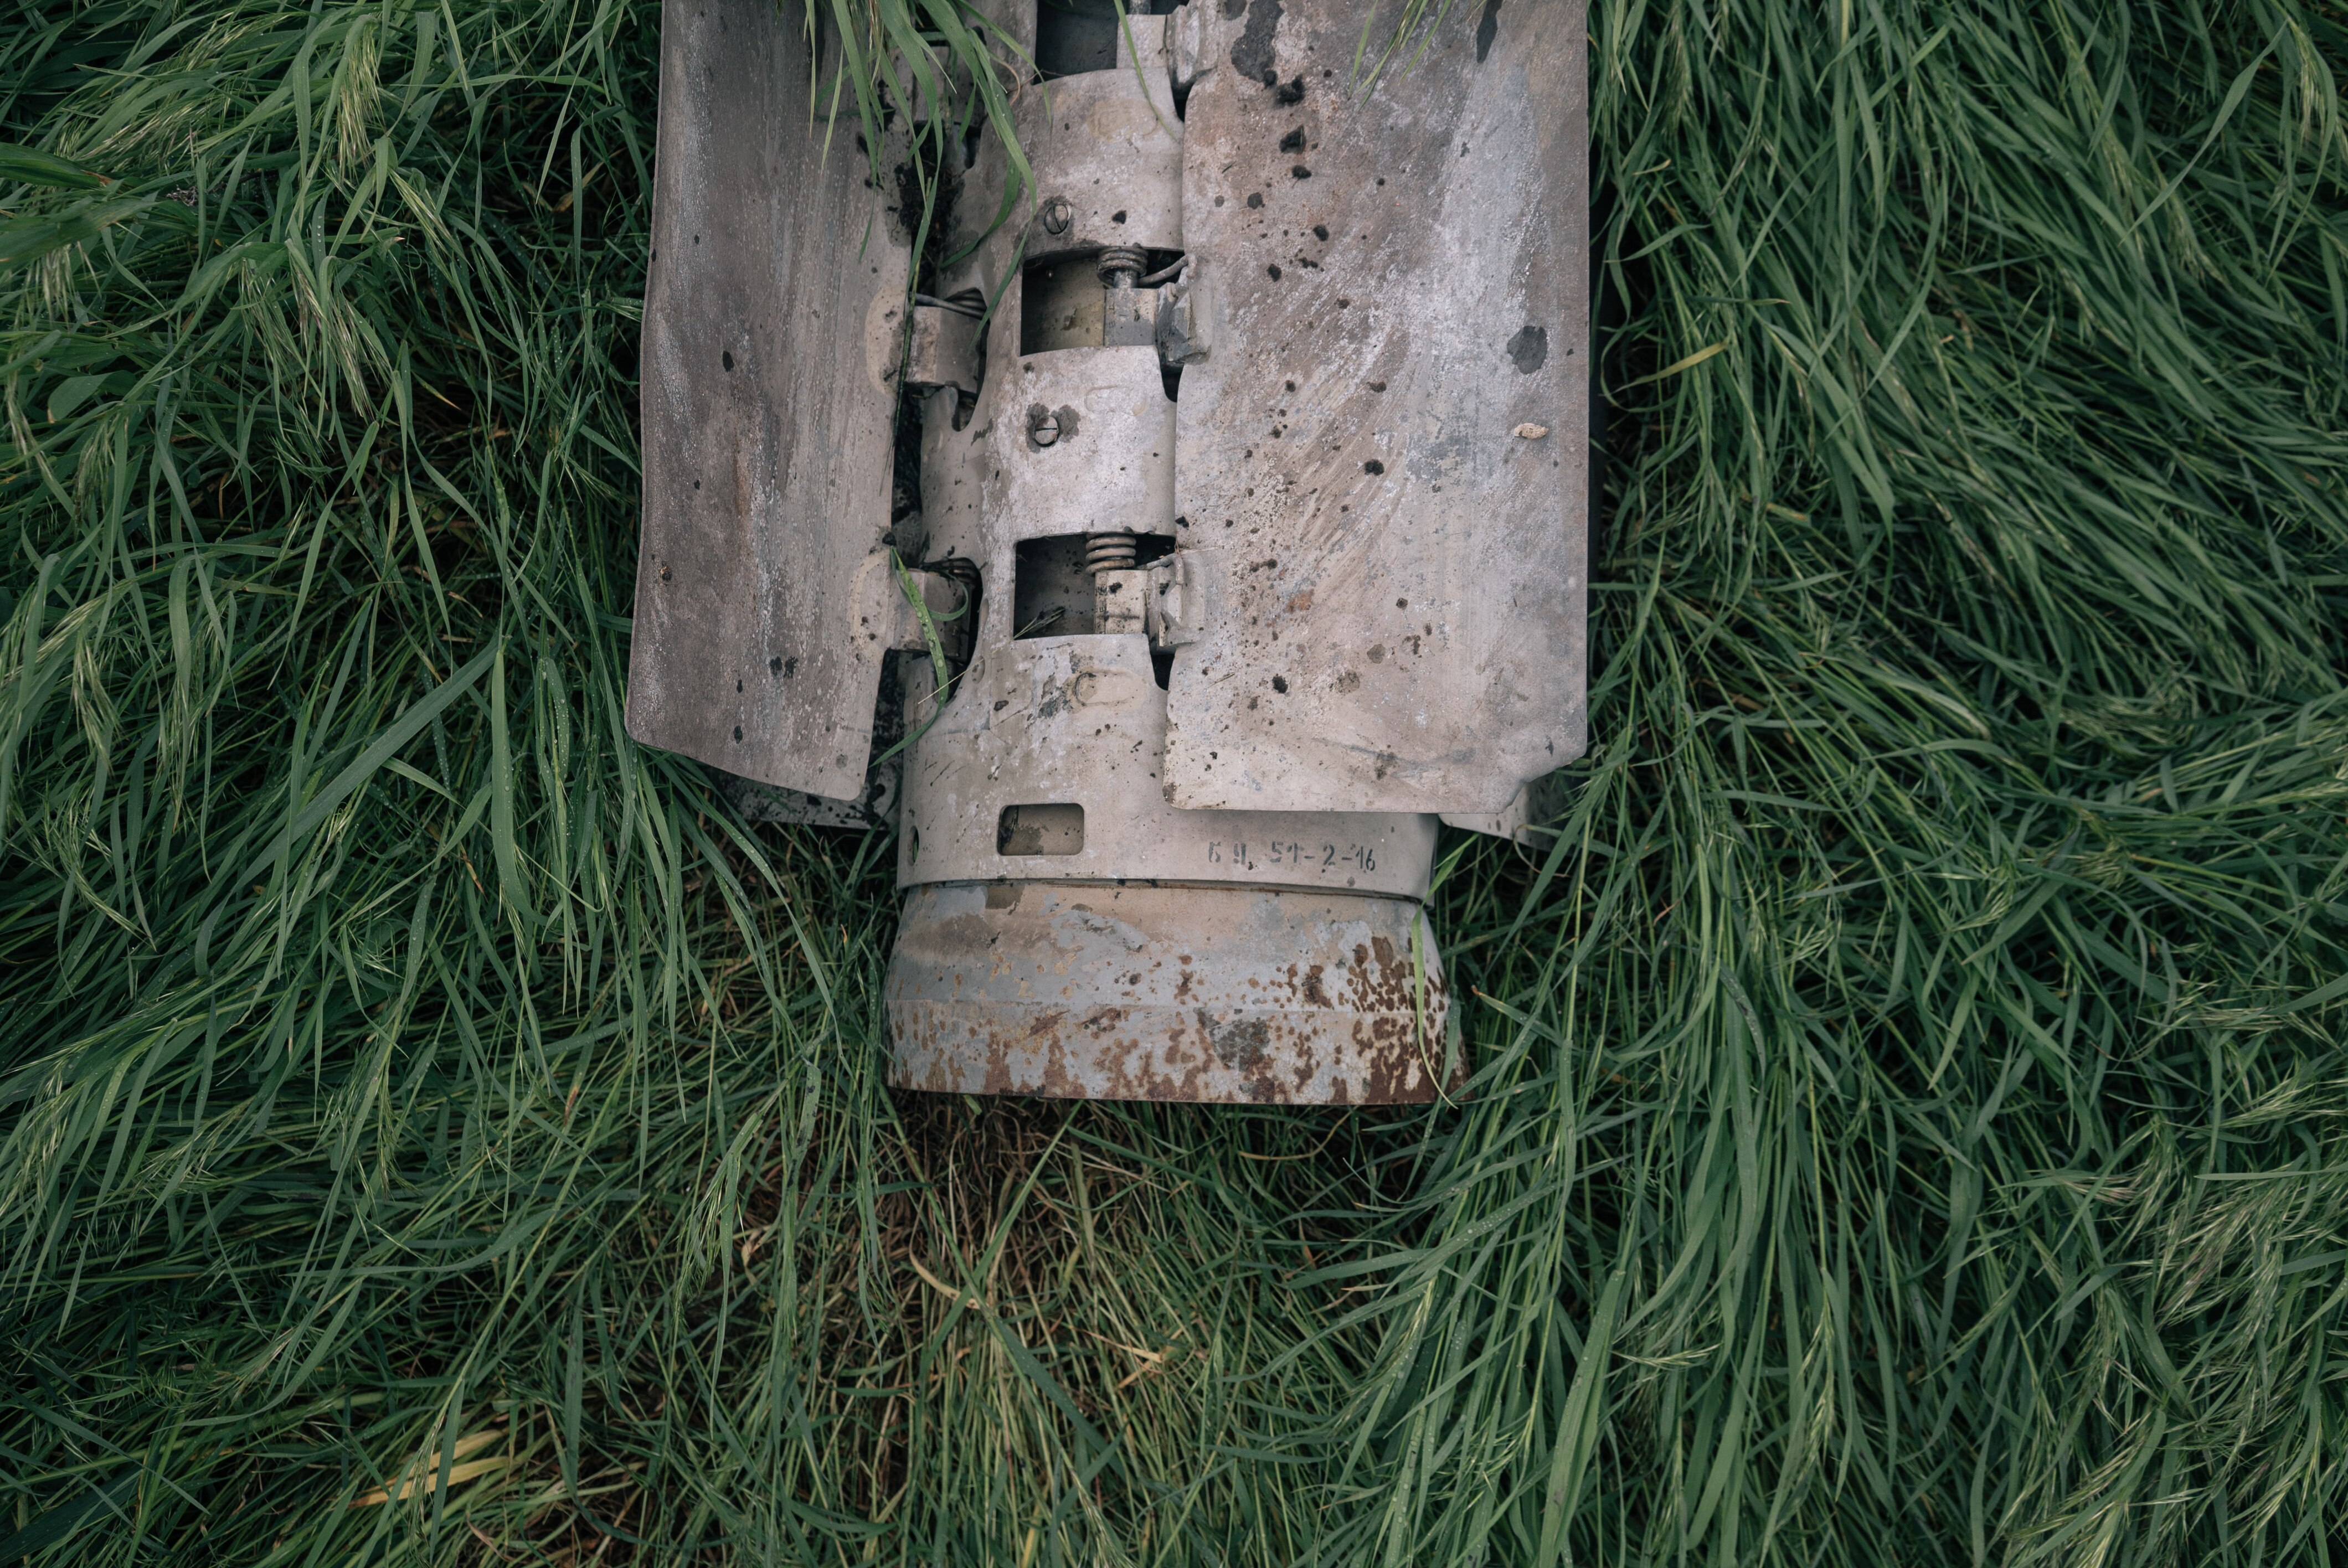 Are cluster munitions a “lesser evil” in the war in Ukraine?